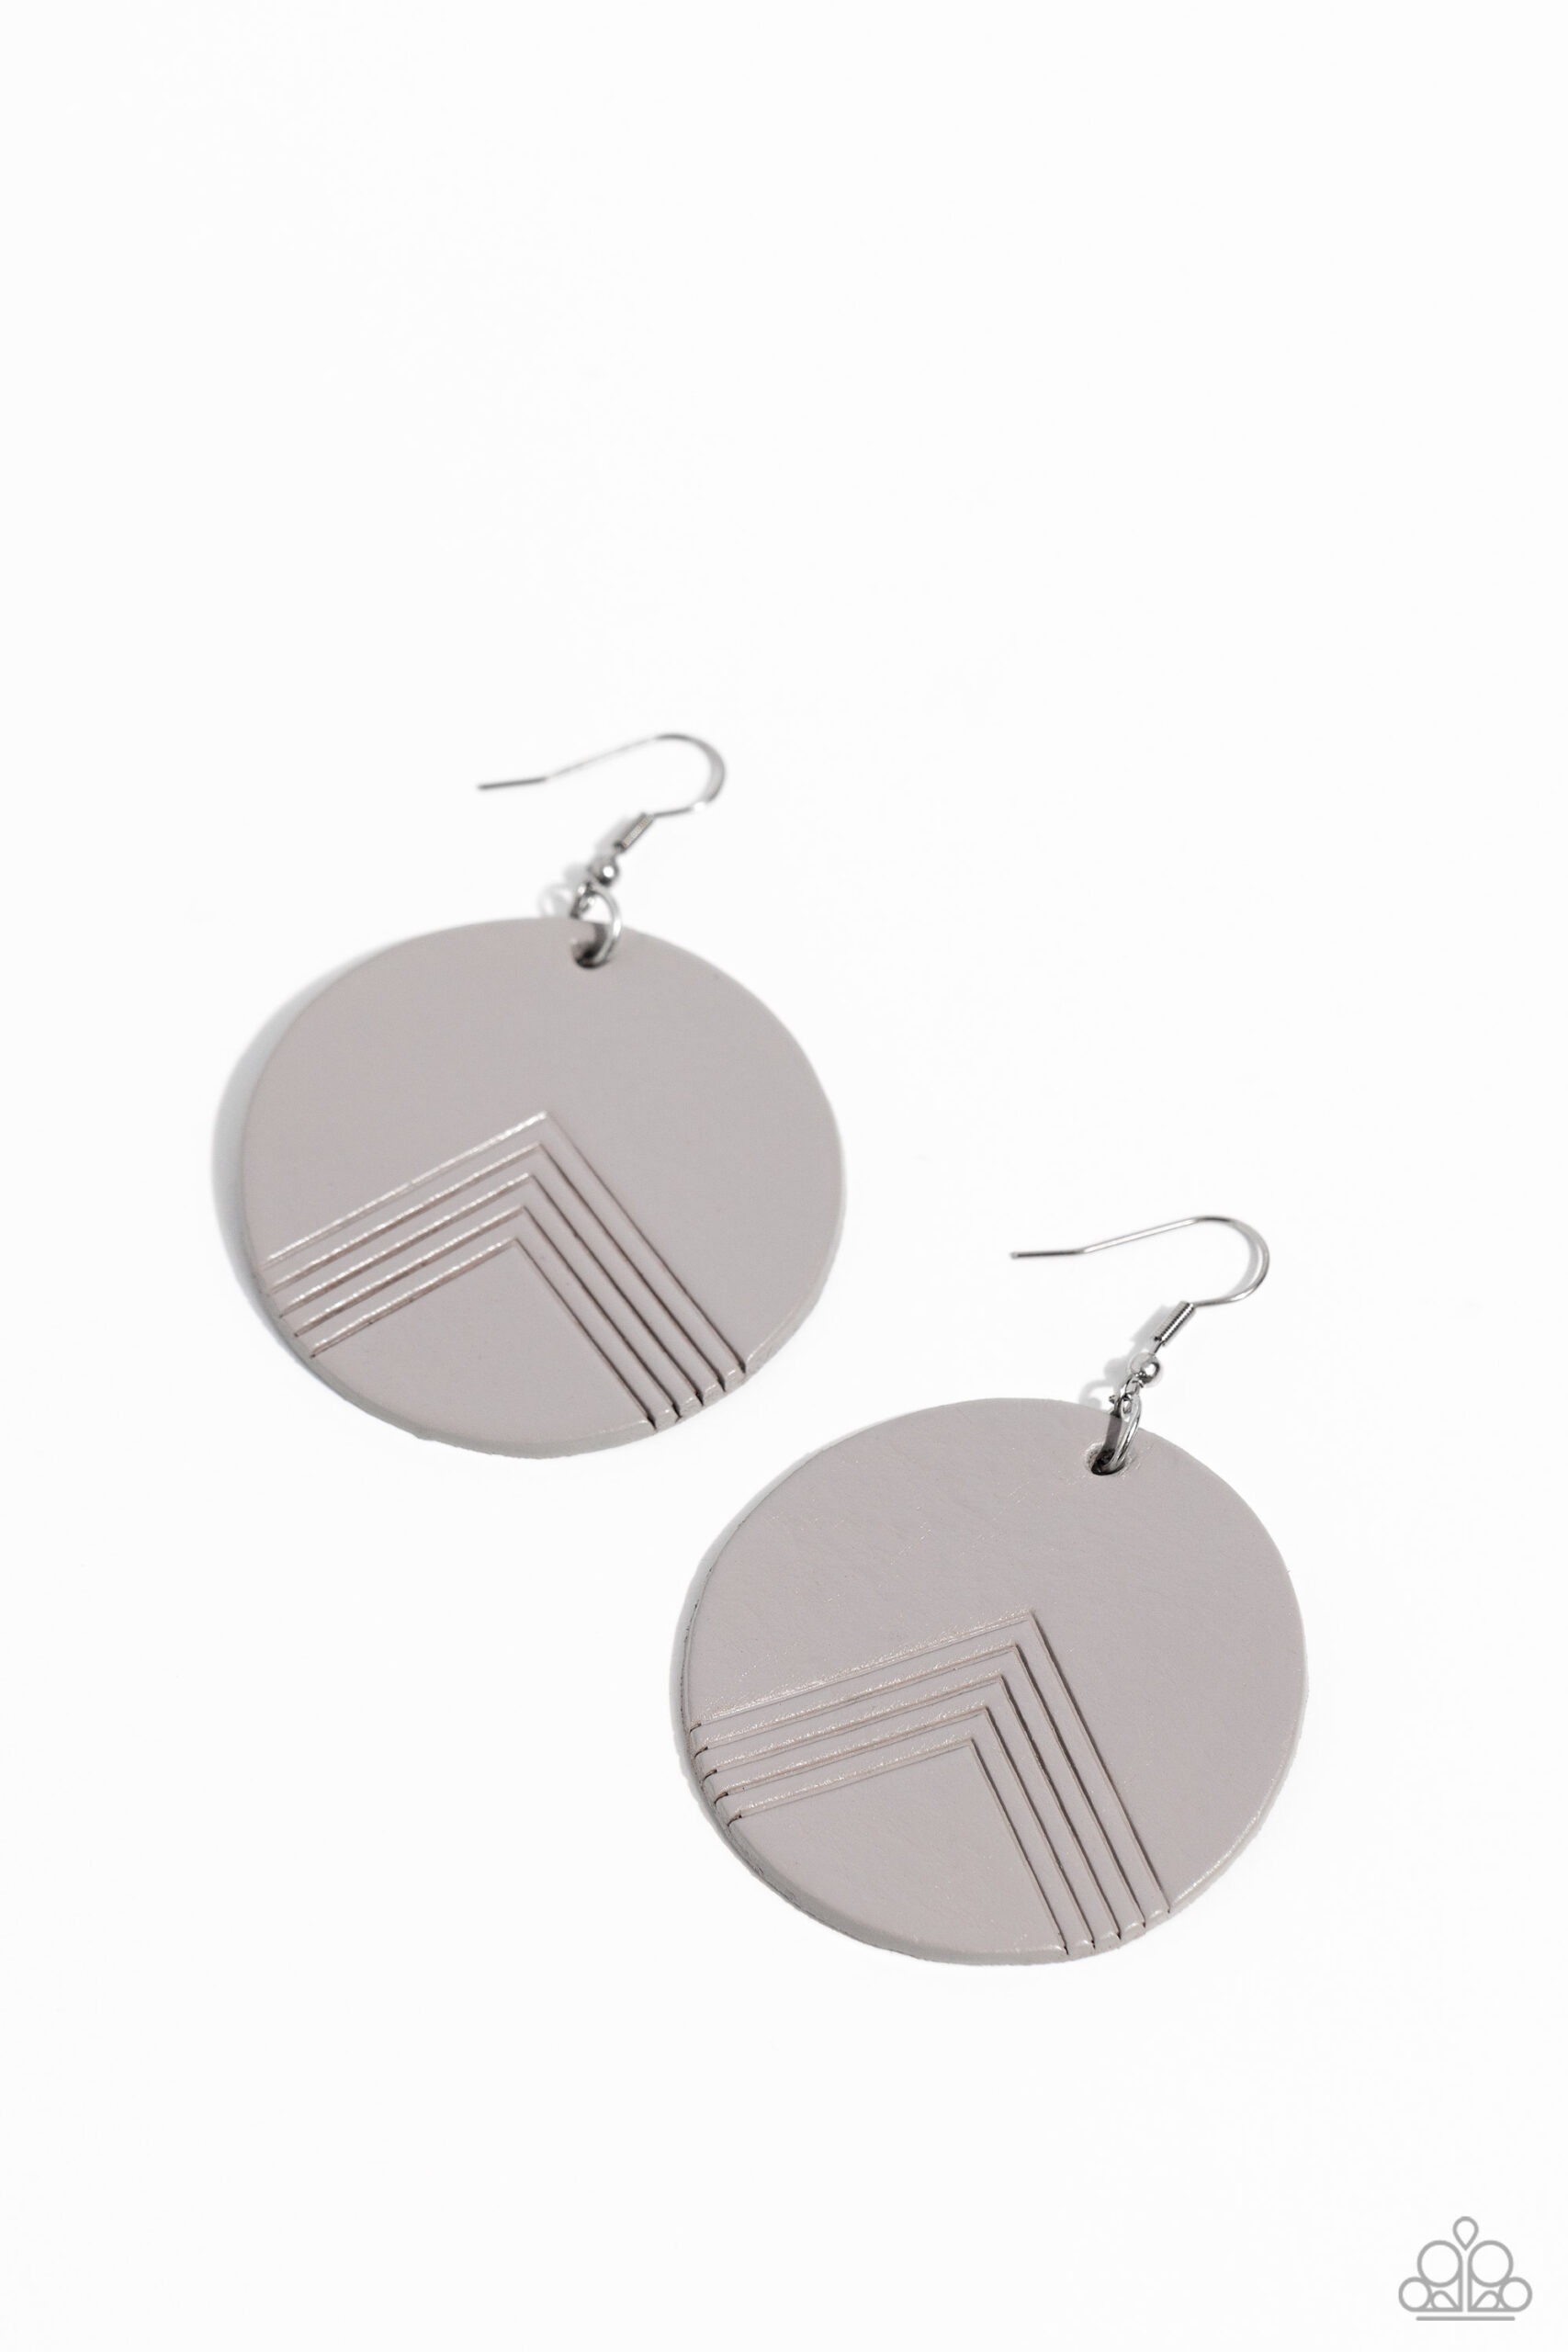 Earring - On the Edge of Edgy - Silver